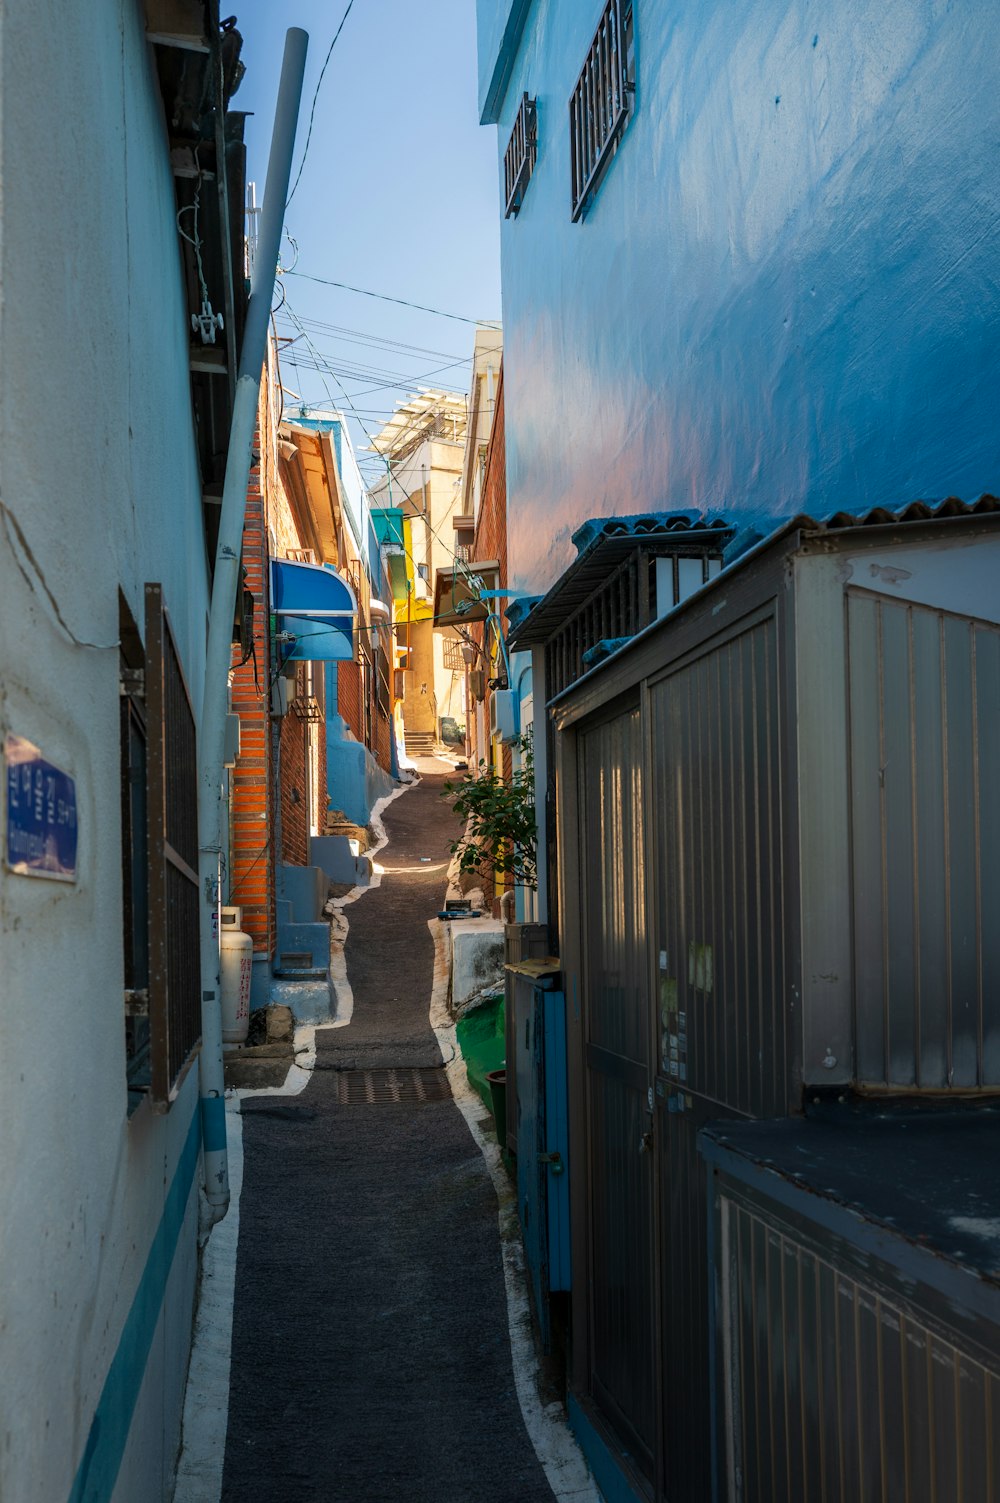 a narrow alley way with a blue building in the background